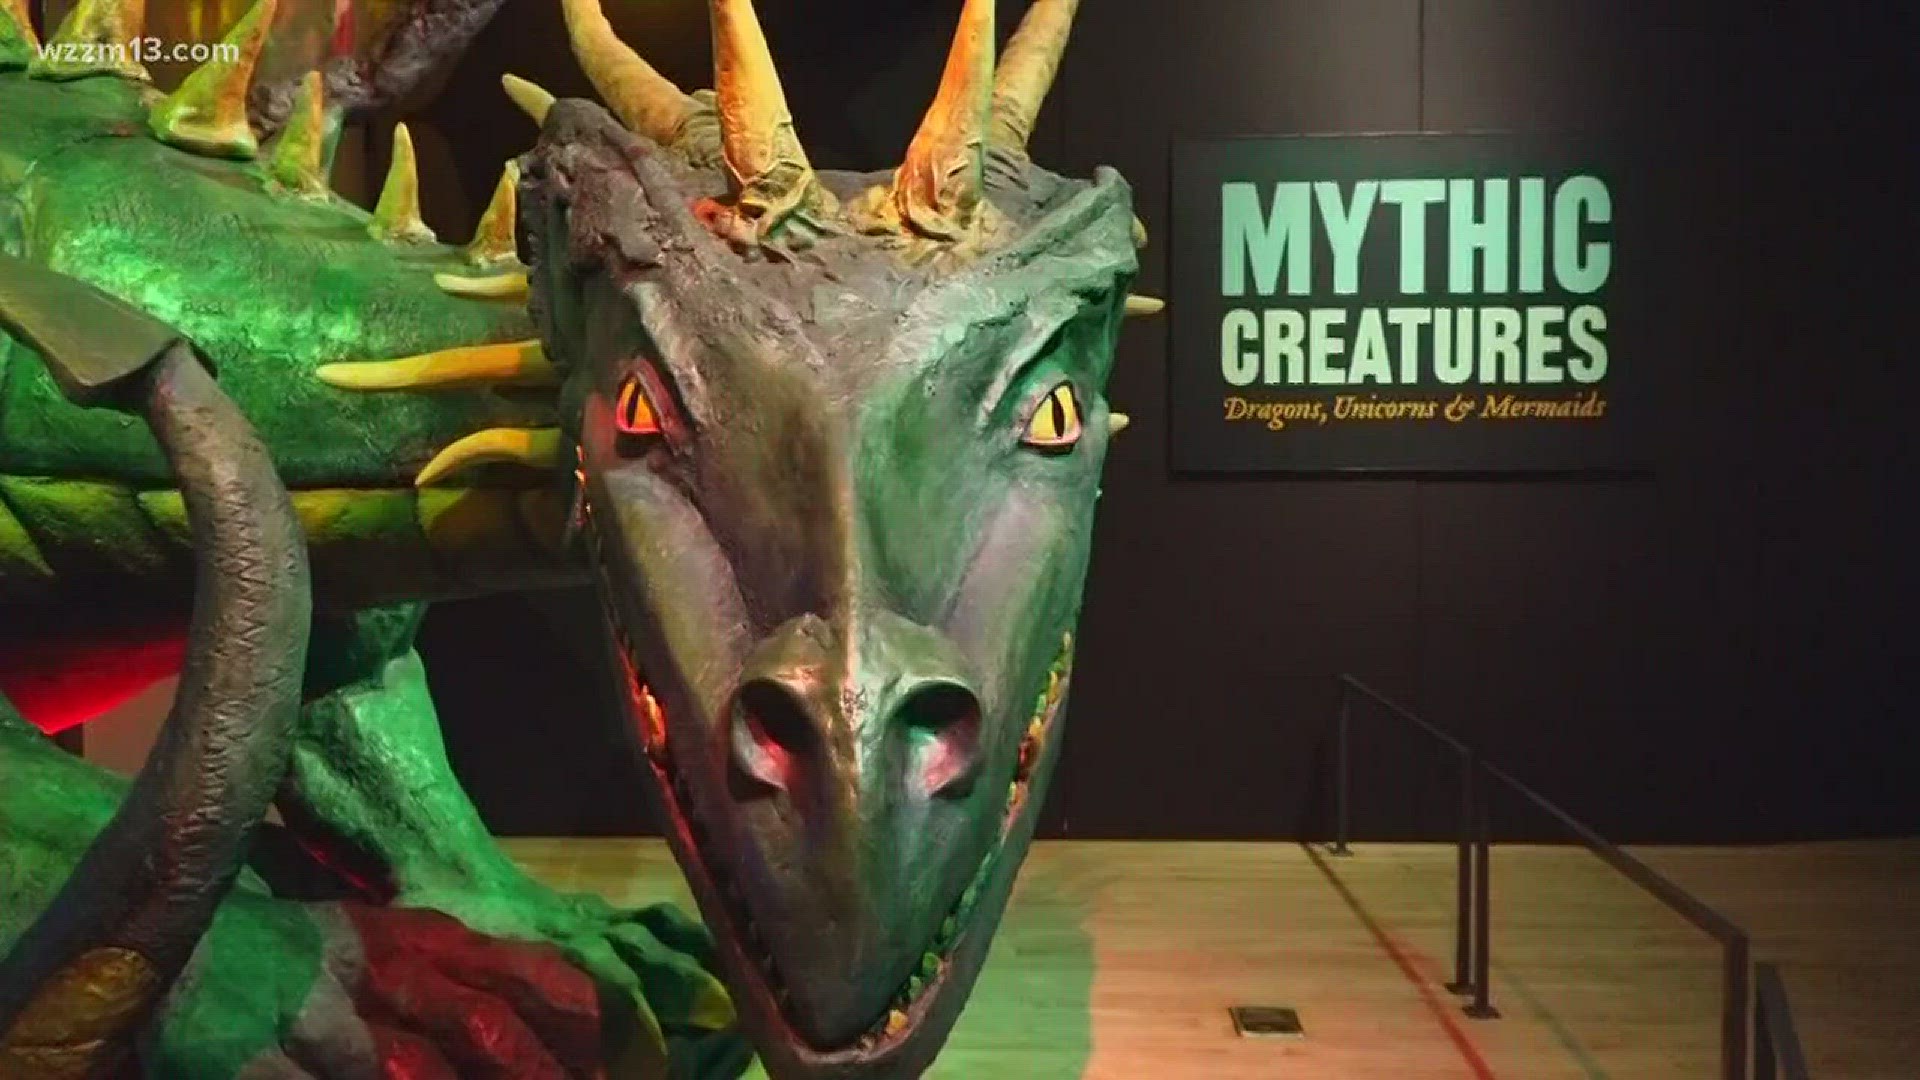 Mythic creatures at GRPM